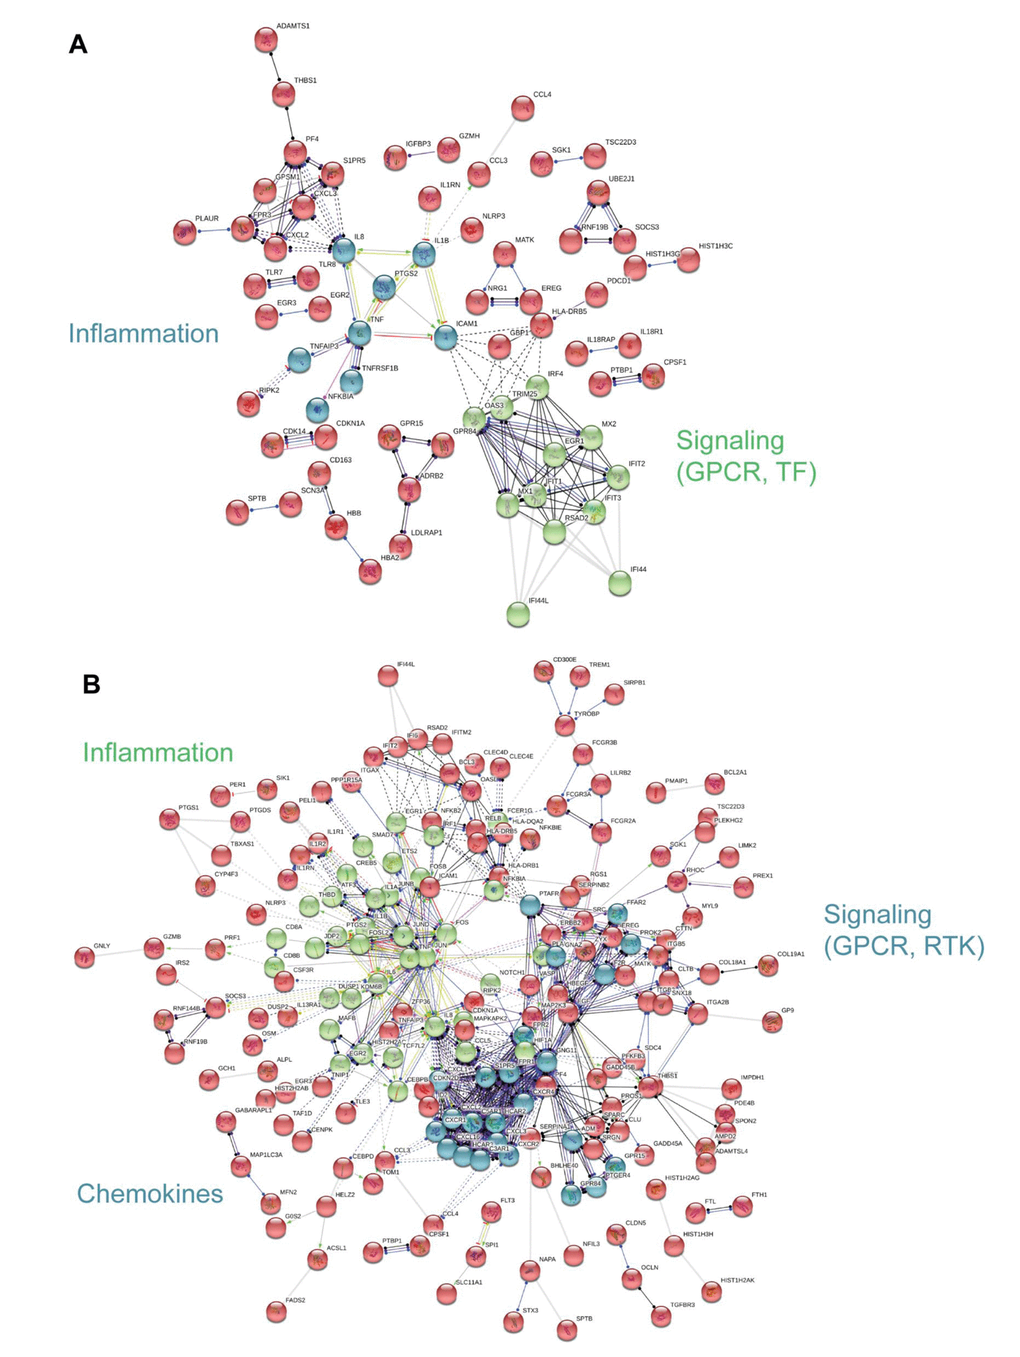 Interaction network analysis of frailty-associated differential gene expression. The interaction network for significant, differentially expressed protein coding genes with frailty in blacks (A) and whites (B) is shown. Network nodes represent proteins and lines (edges) represent protein-protein interactions. The solid lines represent direct interactions between proteins, dashed lines represent indirect interactions between proteins, grey lines represent putative protein interactions. The line colors represent the molecular action type: green (activation), dark blue (binding), black (reaction), red (inhibition), purple (catalysis), yellow (transcriptional regulation). The action effect is represented by the shape at the end of the line: arrow head (positive), perpendicular line (negative), dot (unspecified). The prominent functional clusters in blacks and whites are indicated.